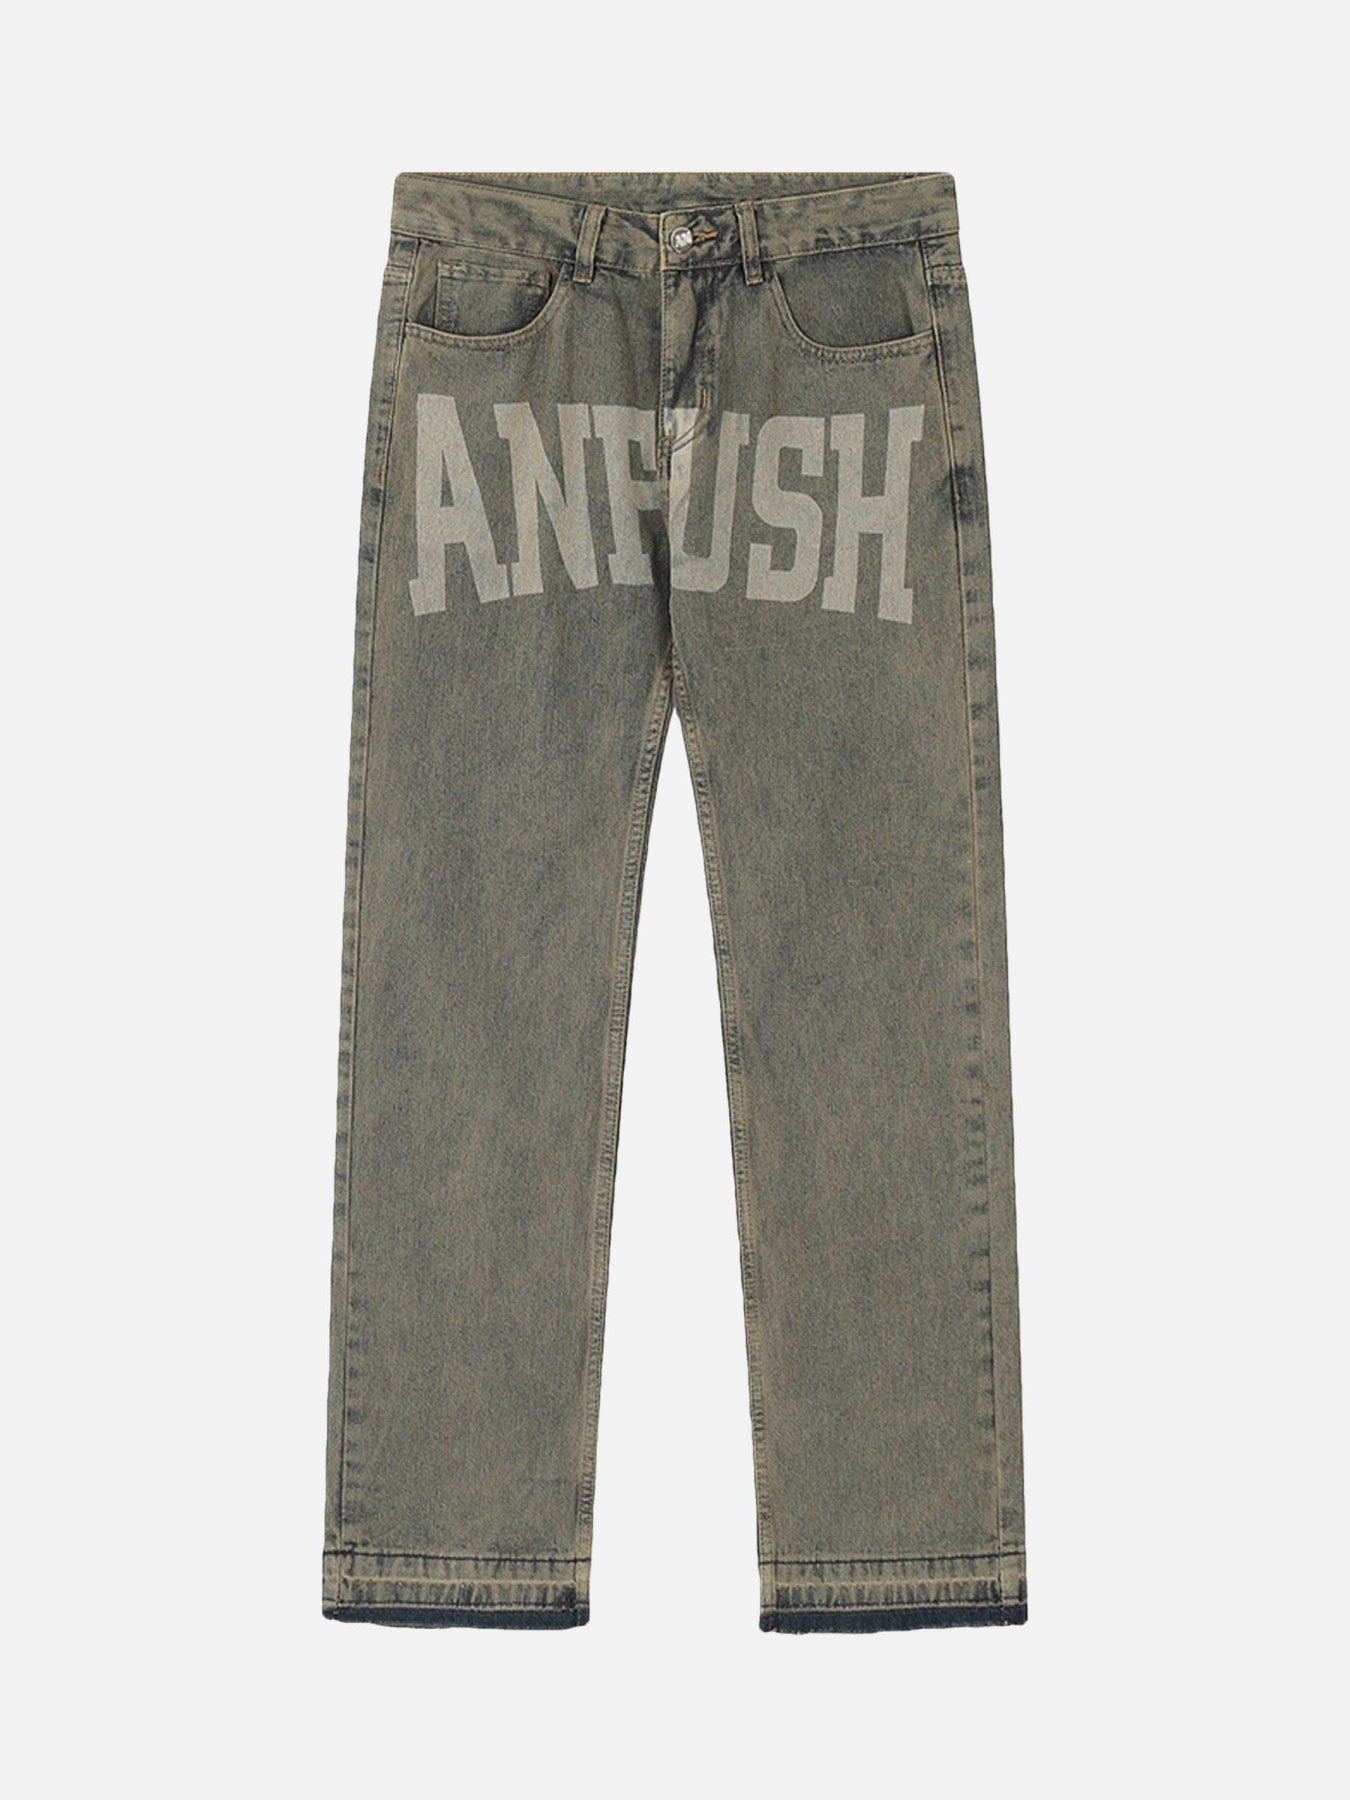 The Supermade American Vintage Letter Print Jeans